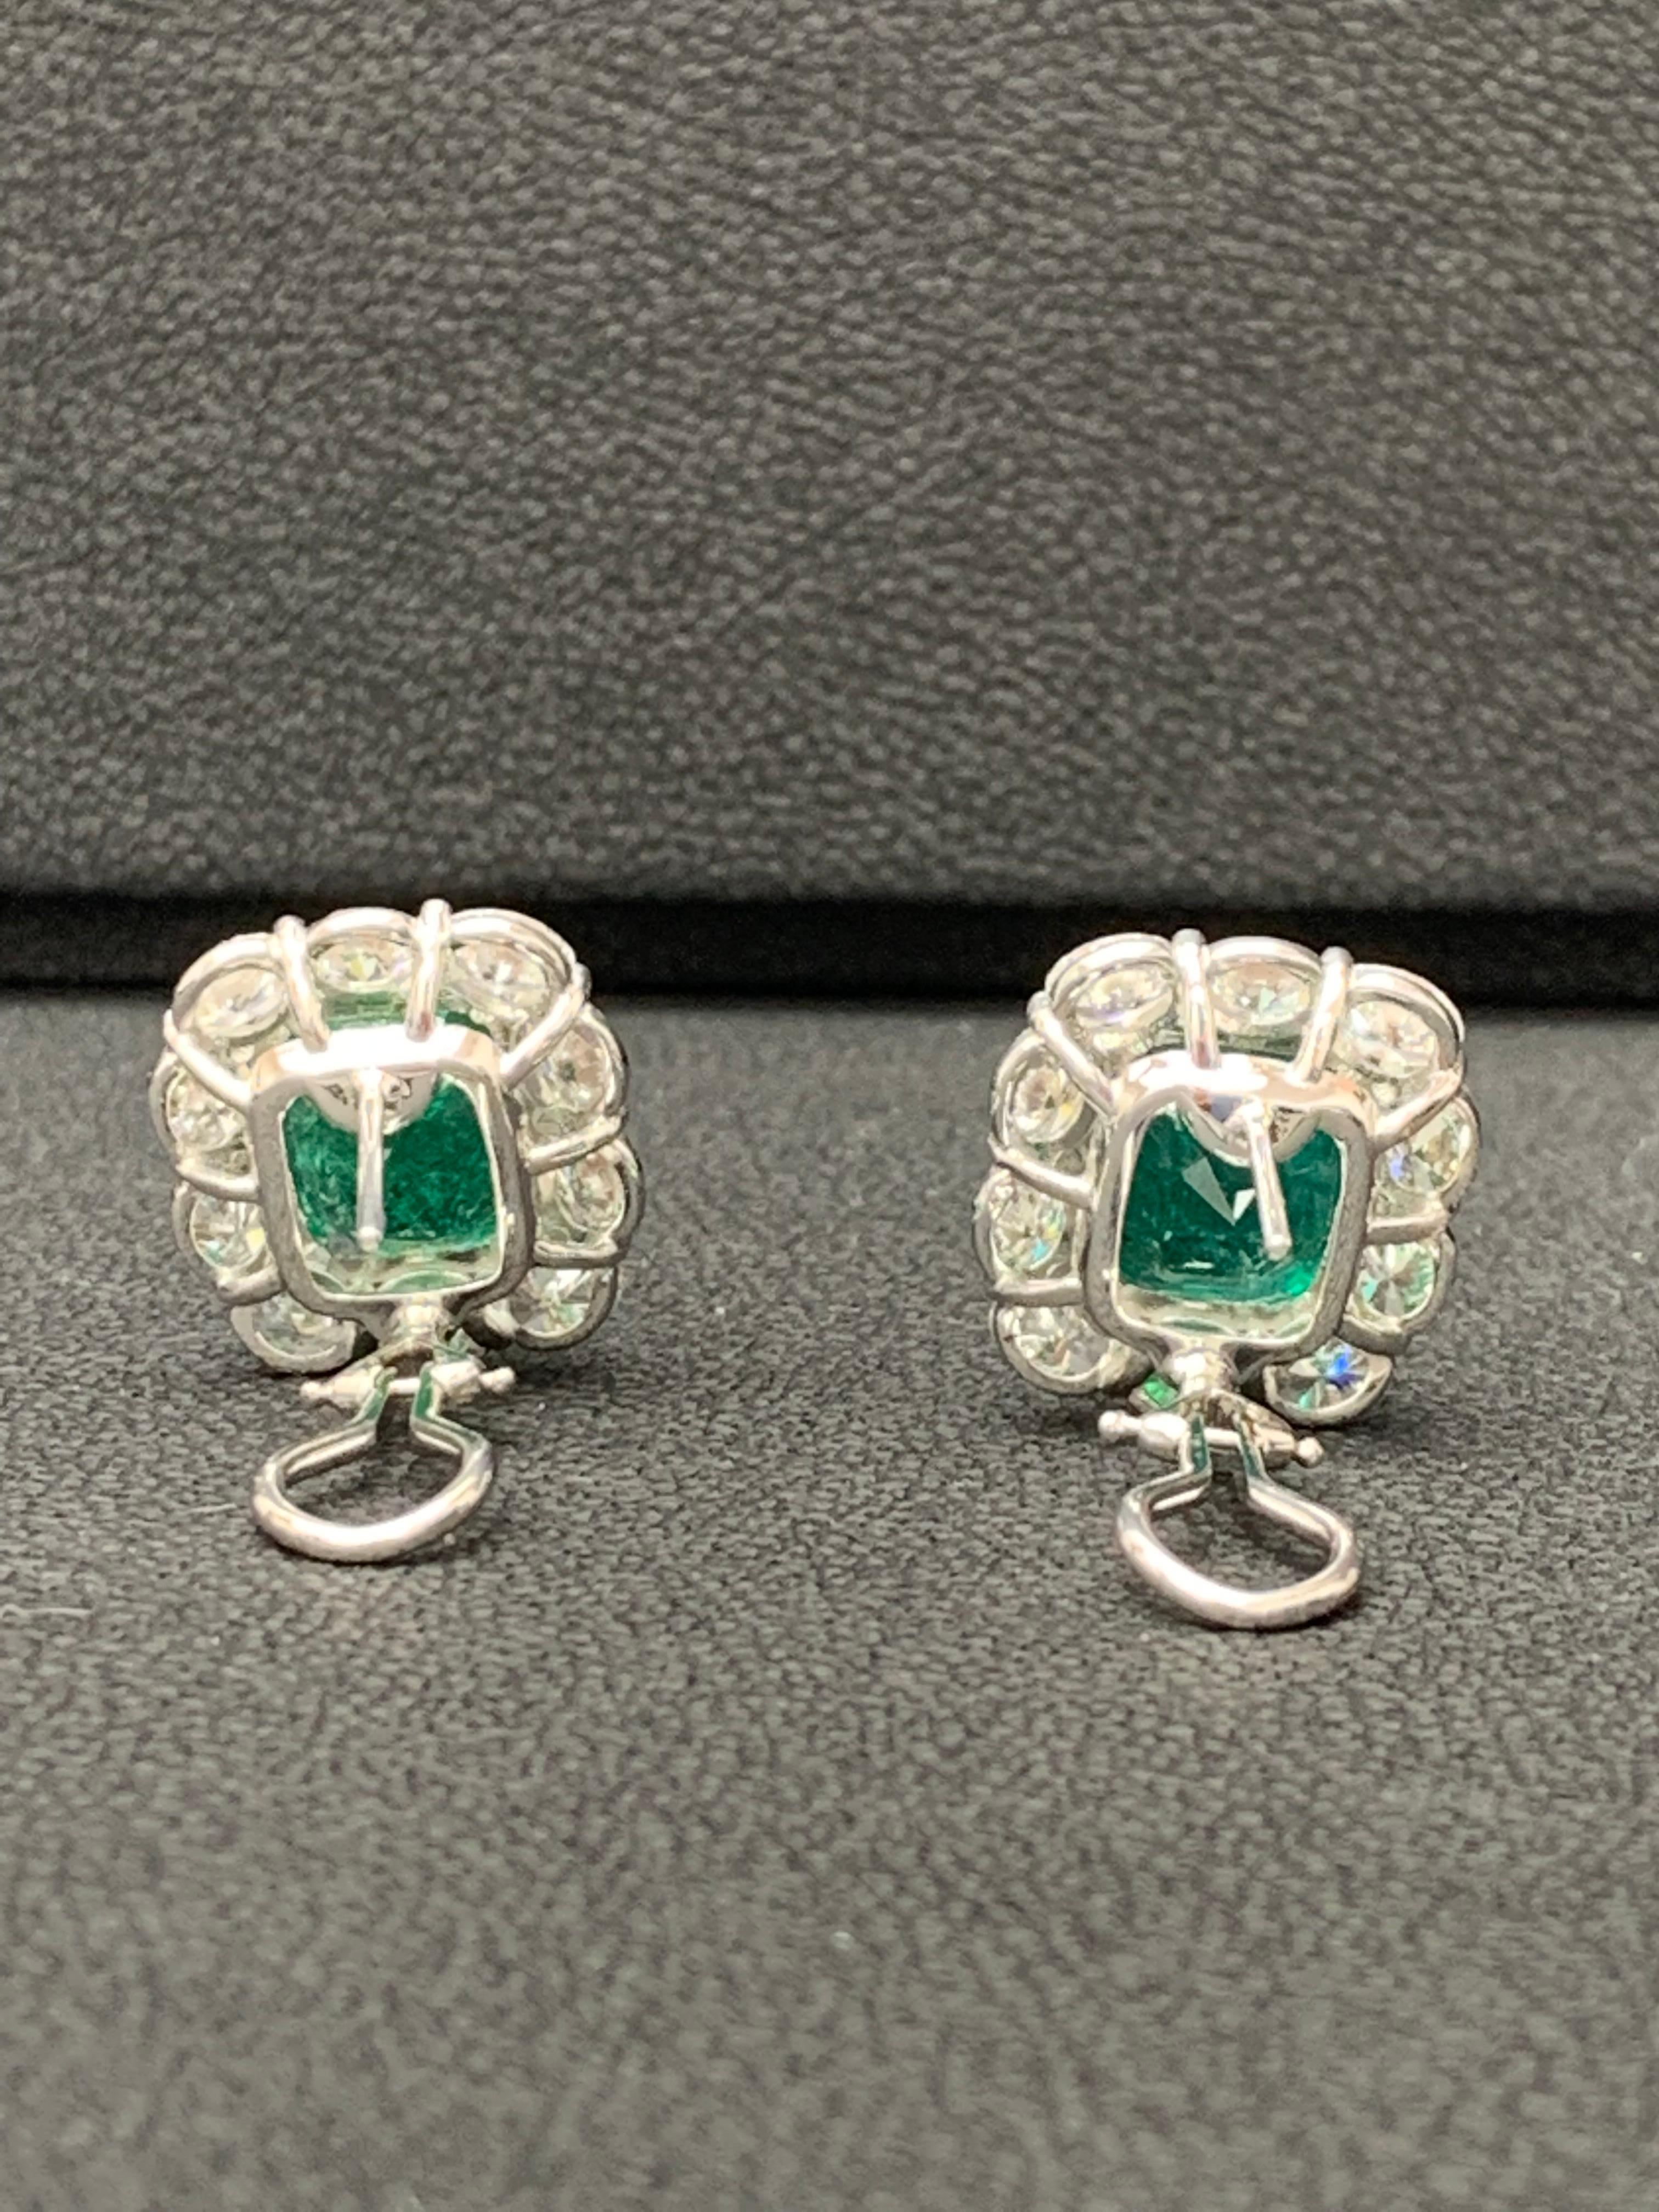 11.57 Carat Cushion Cut Emeralds and Diamond Halo Earrings in 18K White Gold For Sale 4